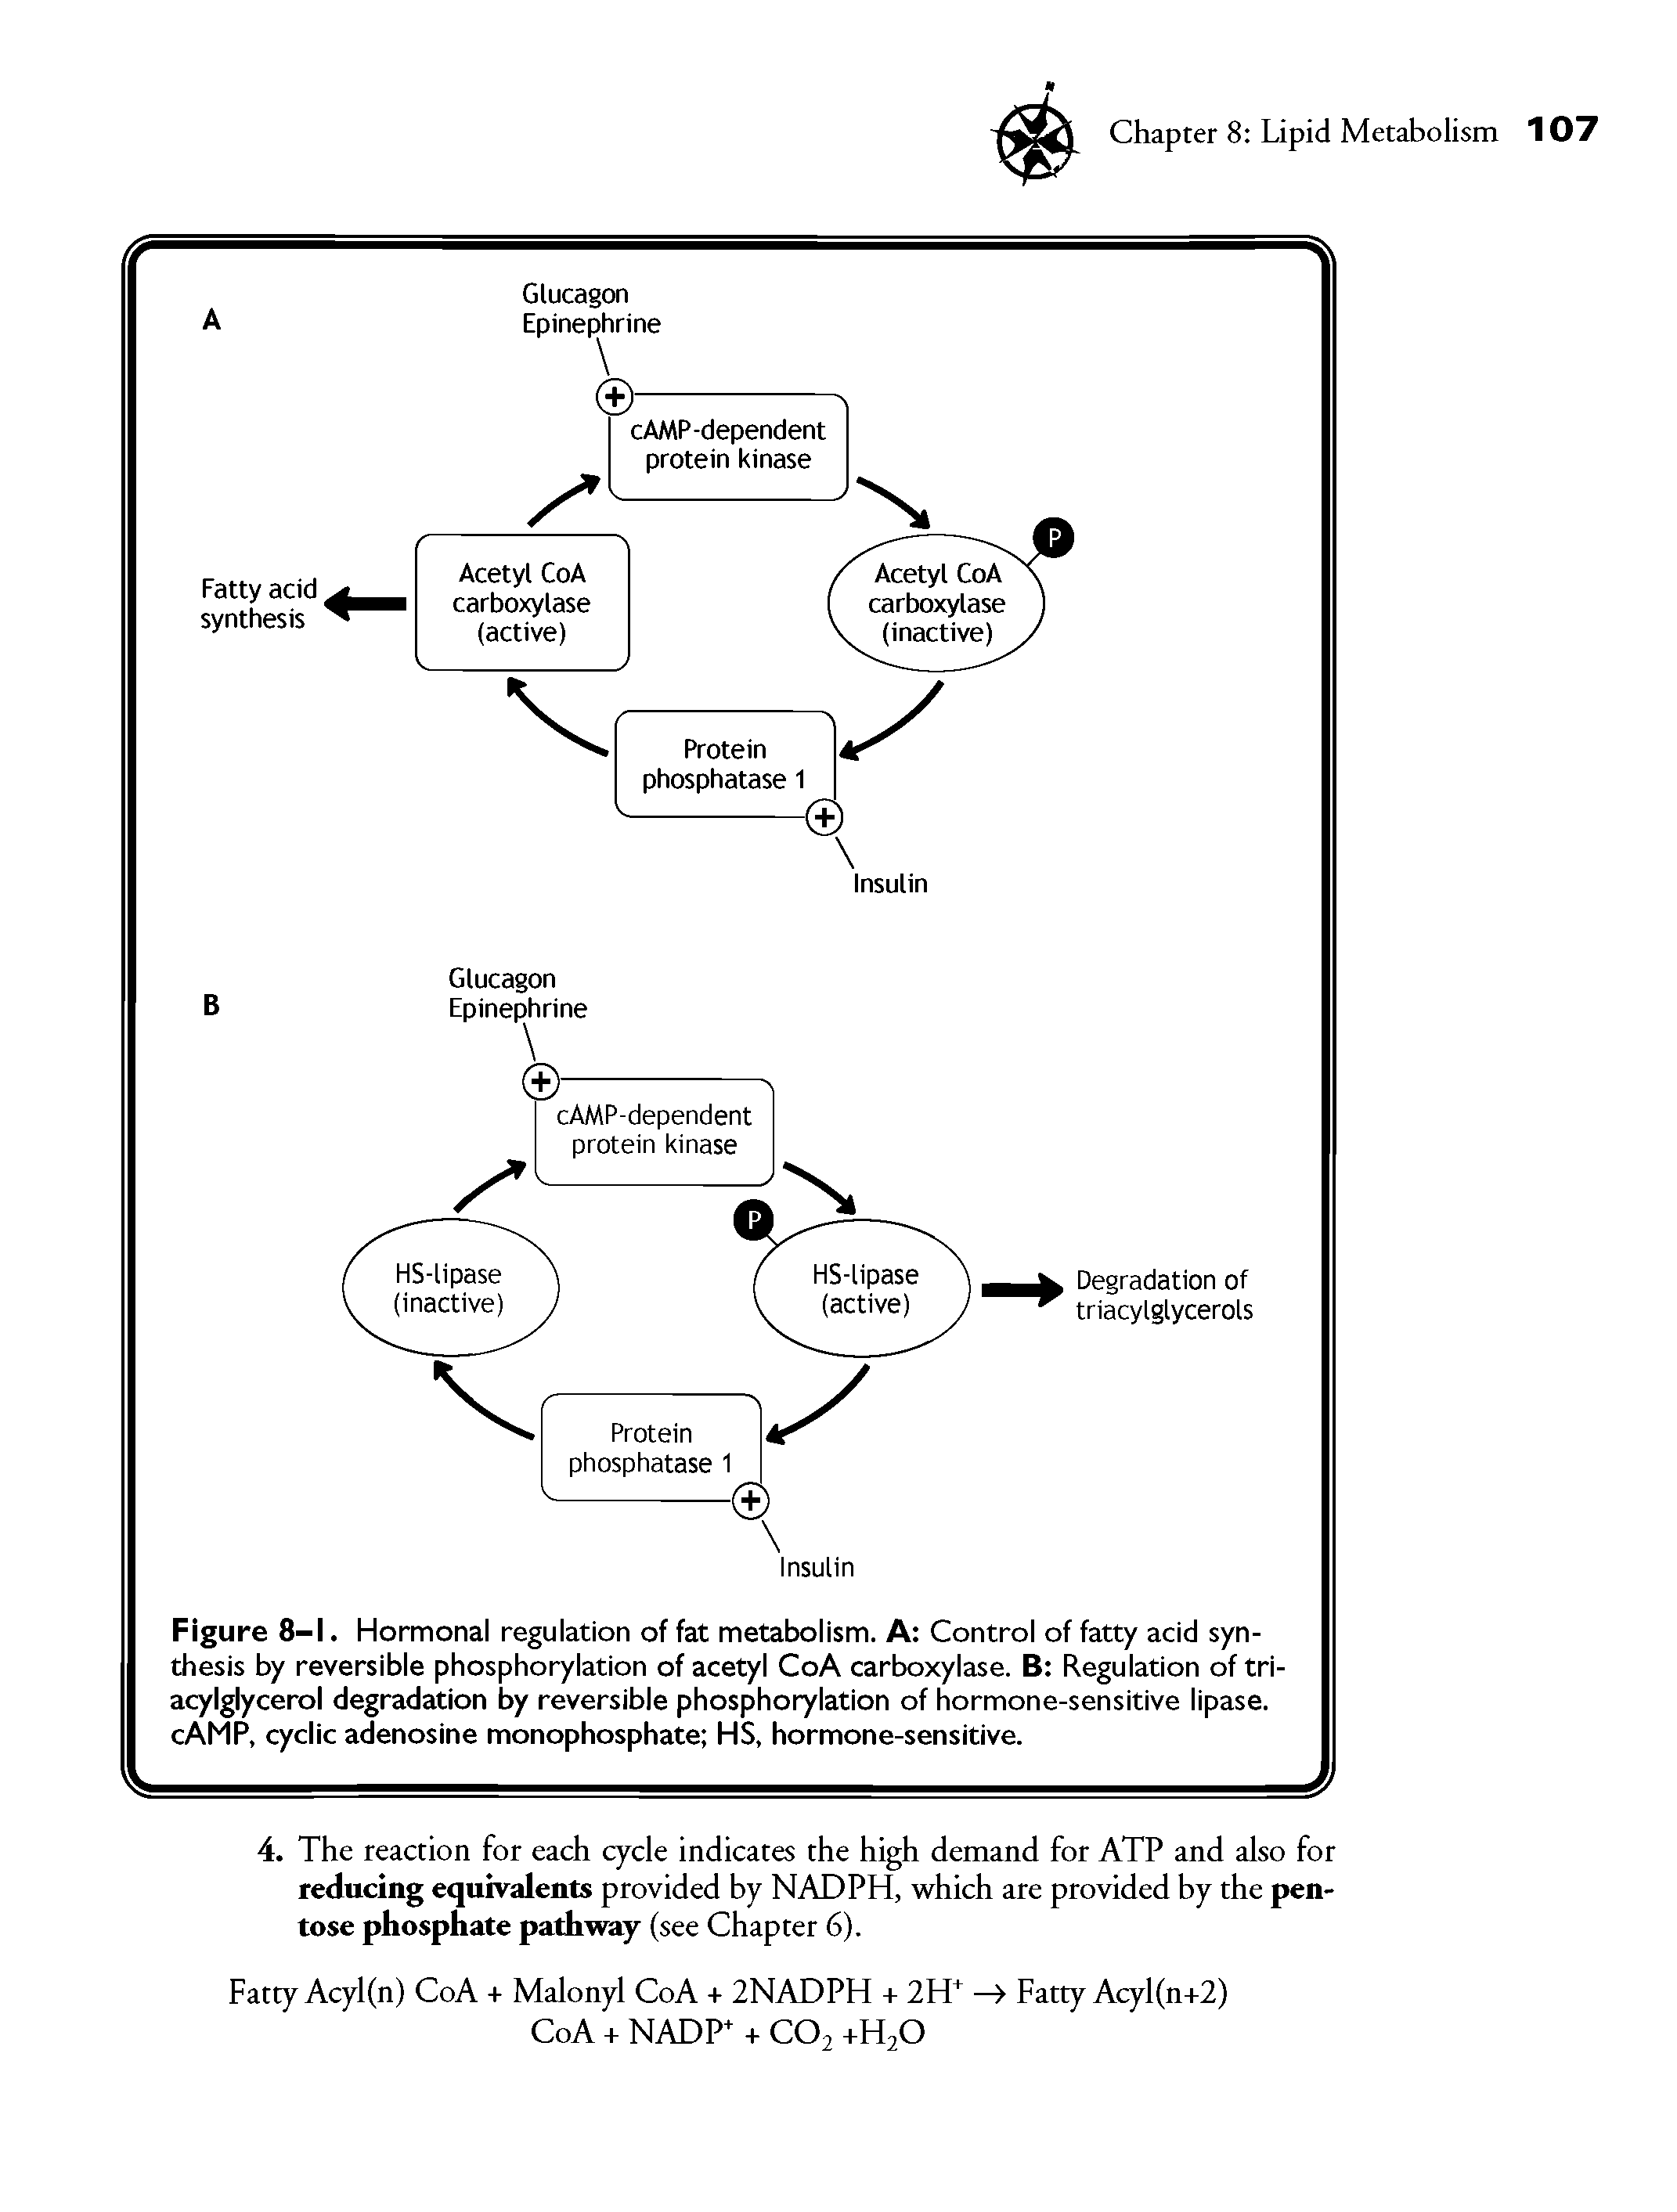 Figure 8-1. Hormonal regulation of fat metabolism. A Control of fatty acid synthesis by reversible phosphorylation of acetyl CoA carboxylase. B Regulation of tri-acylglycerol degradation by reversible phosphorylation of hormone-sensitive lipase. cAMP, cyclic adenosine monophosphate HS, hormone-sensitive.